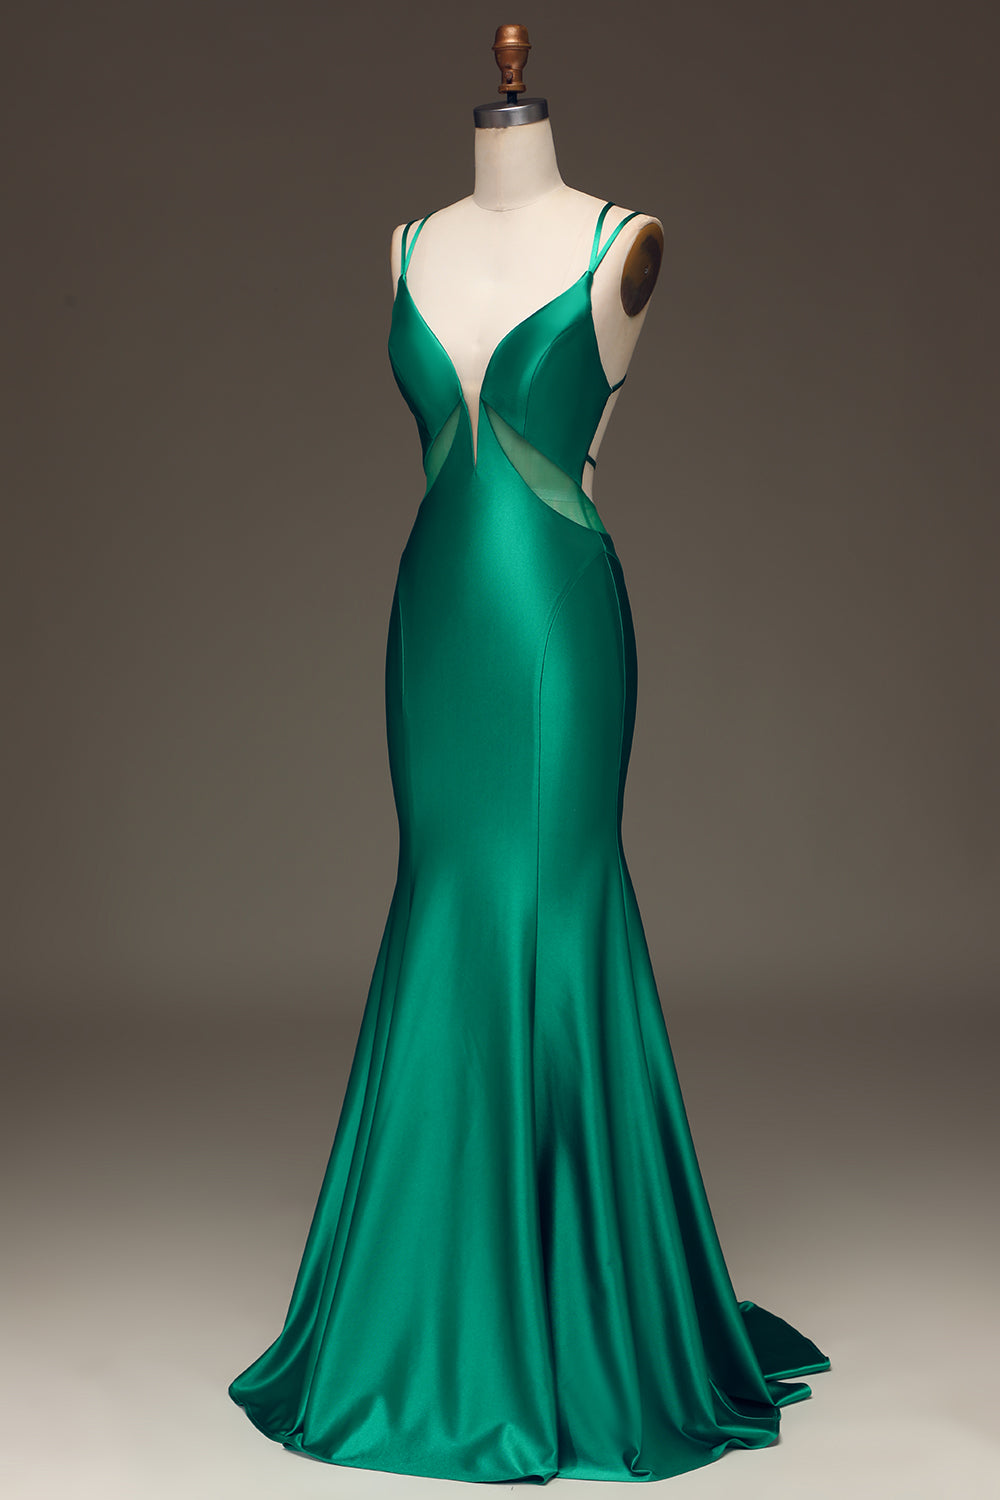 Green Mermaid Deep V-Neck Satin Long Prom Dress with Lace-up Back